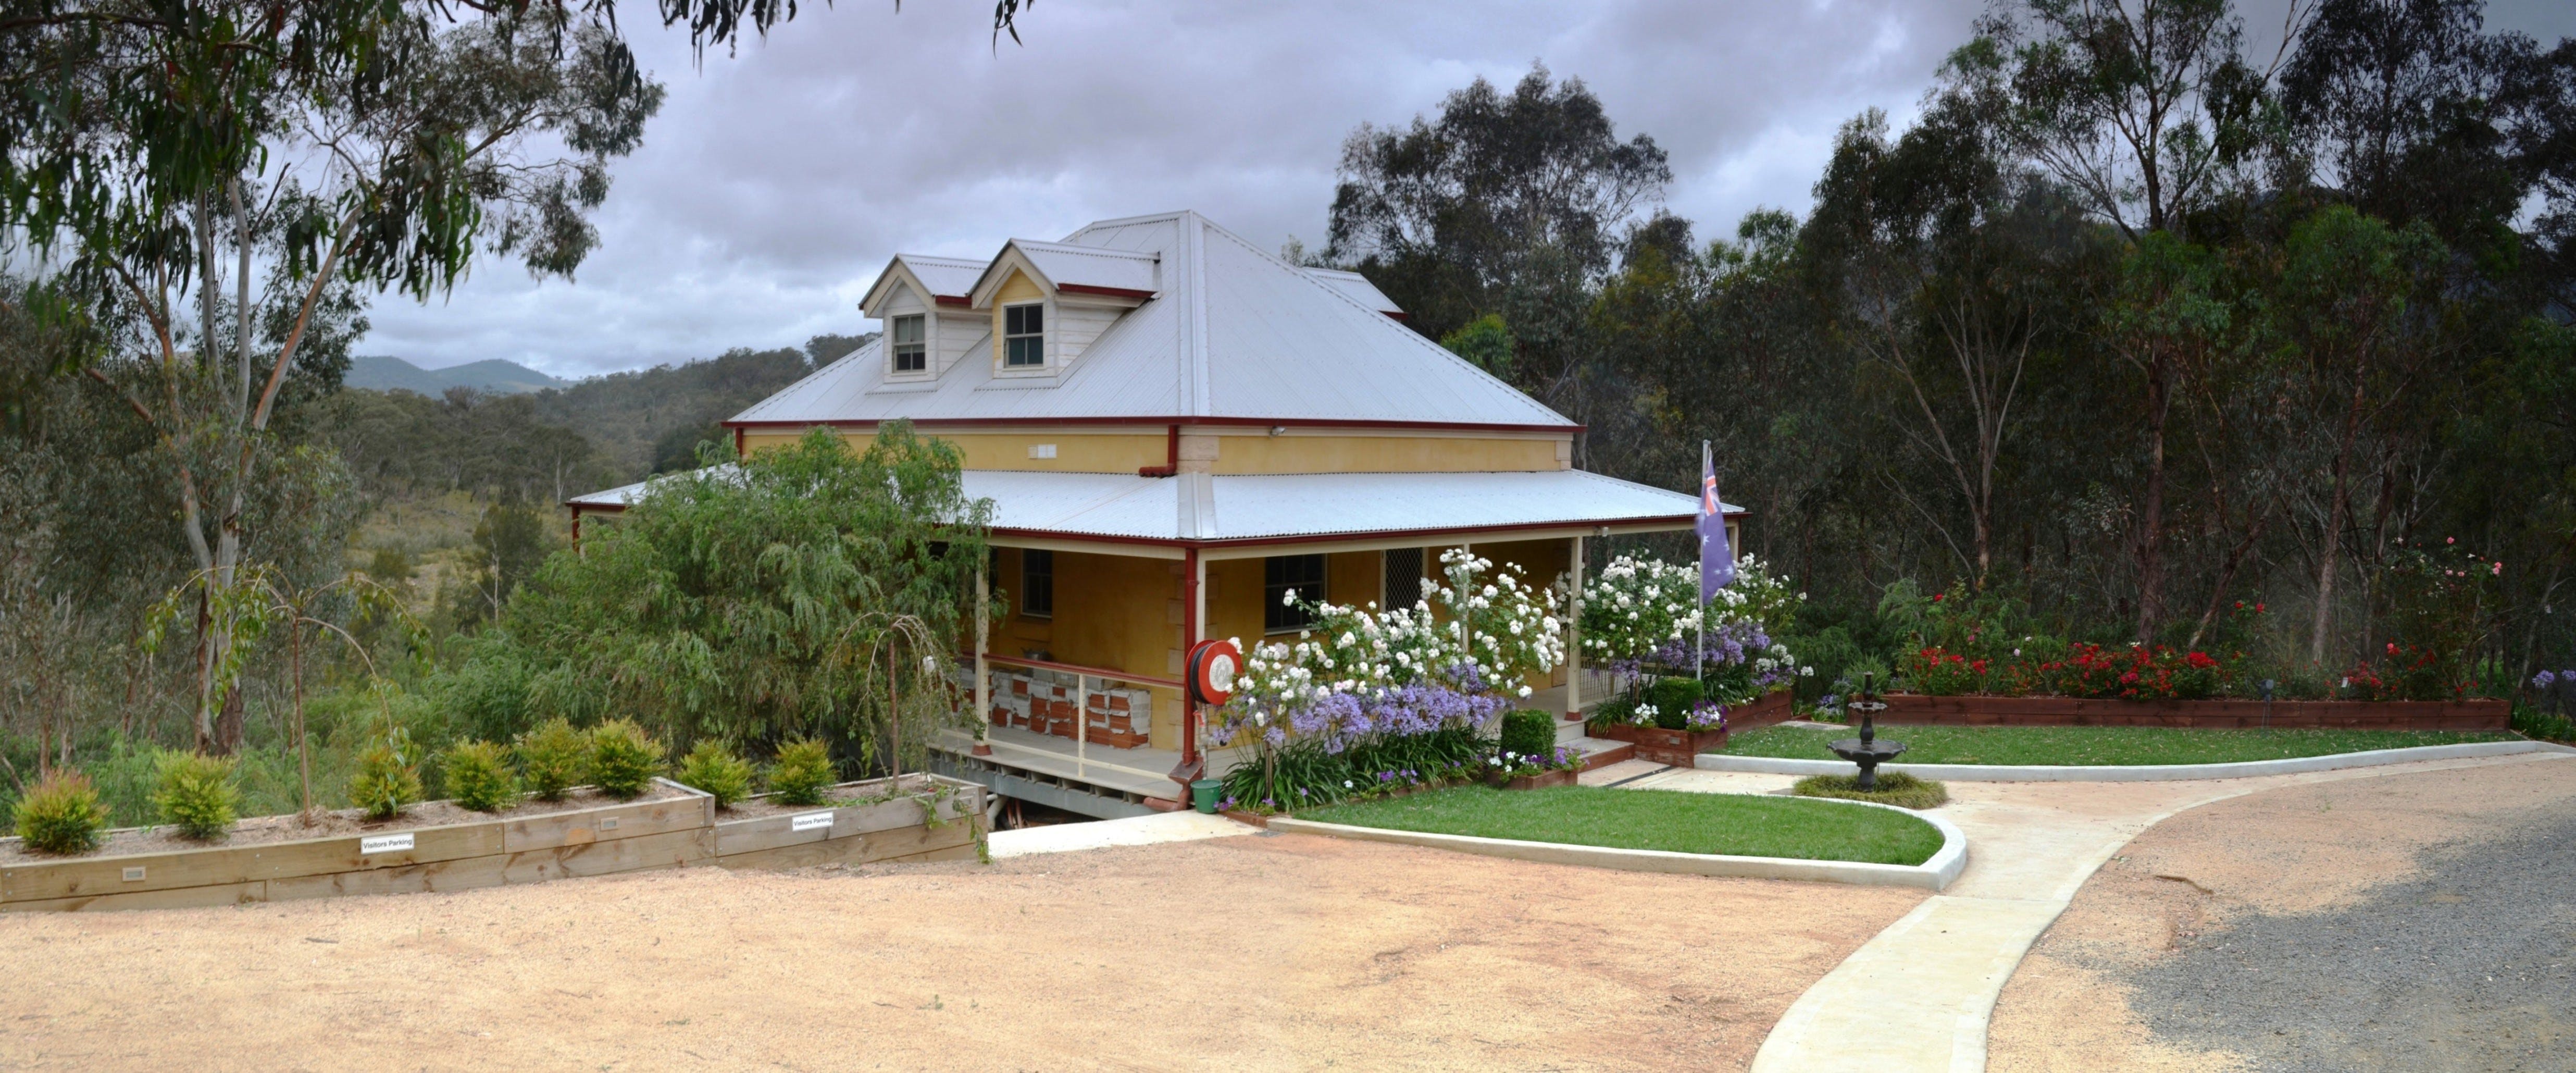 Tanwarra Lodge Bed and Breakfast - Dalby Accommodation